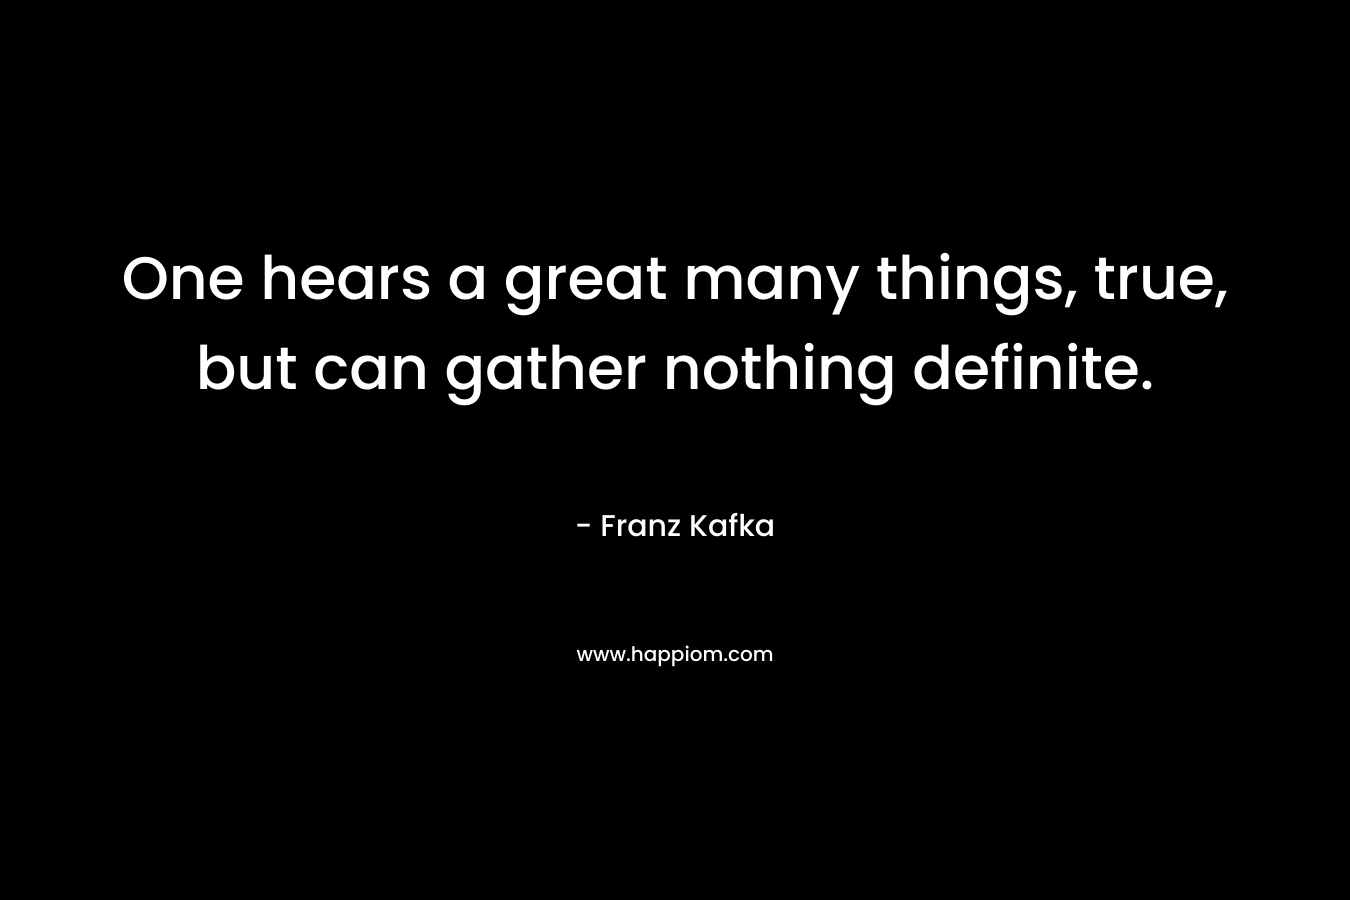 One hears a great many things, true, but can gather nothing definite.